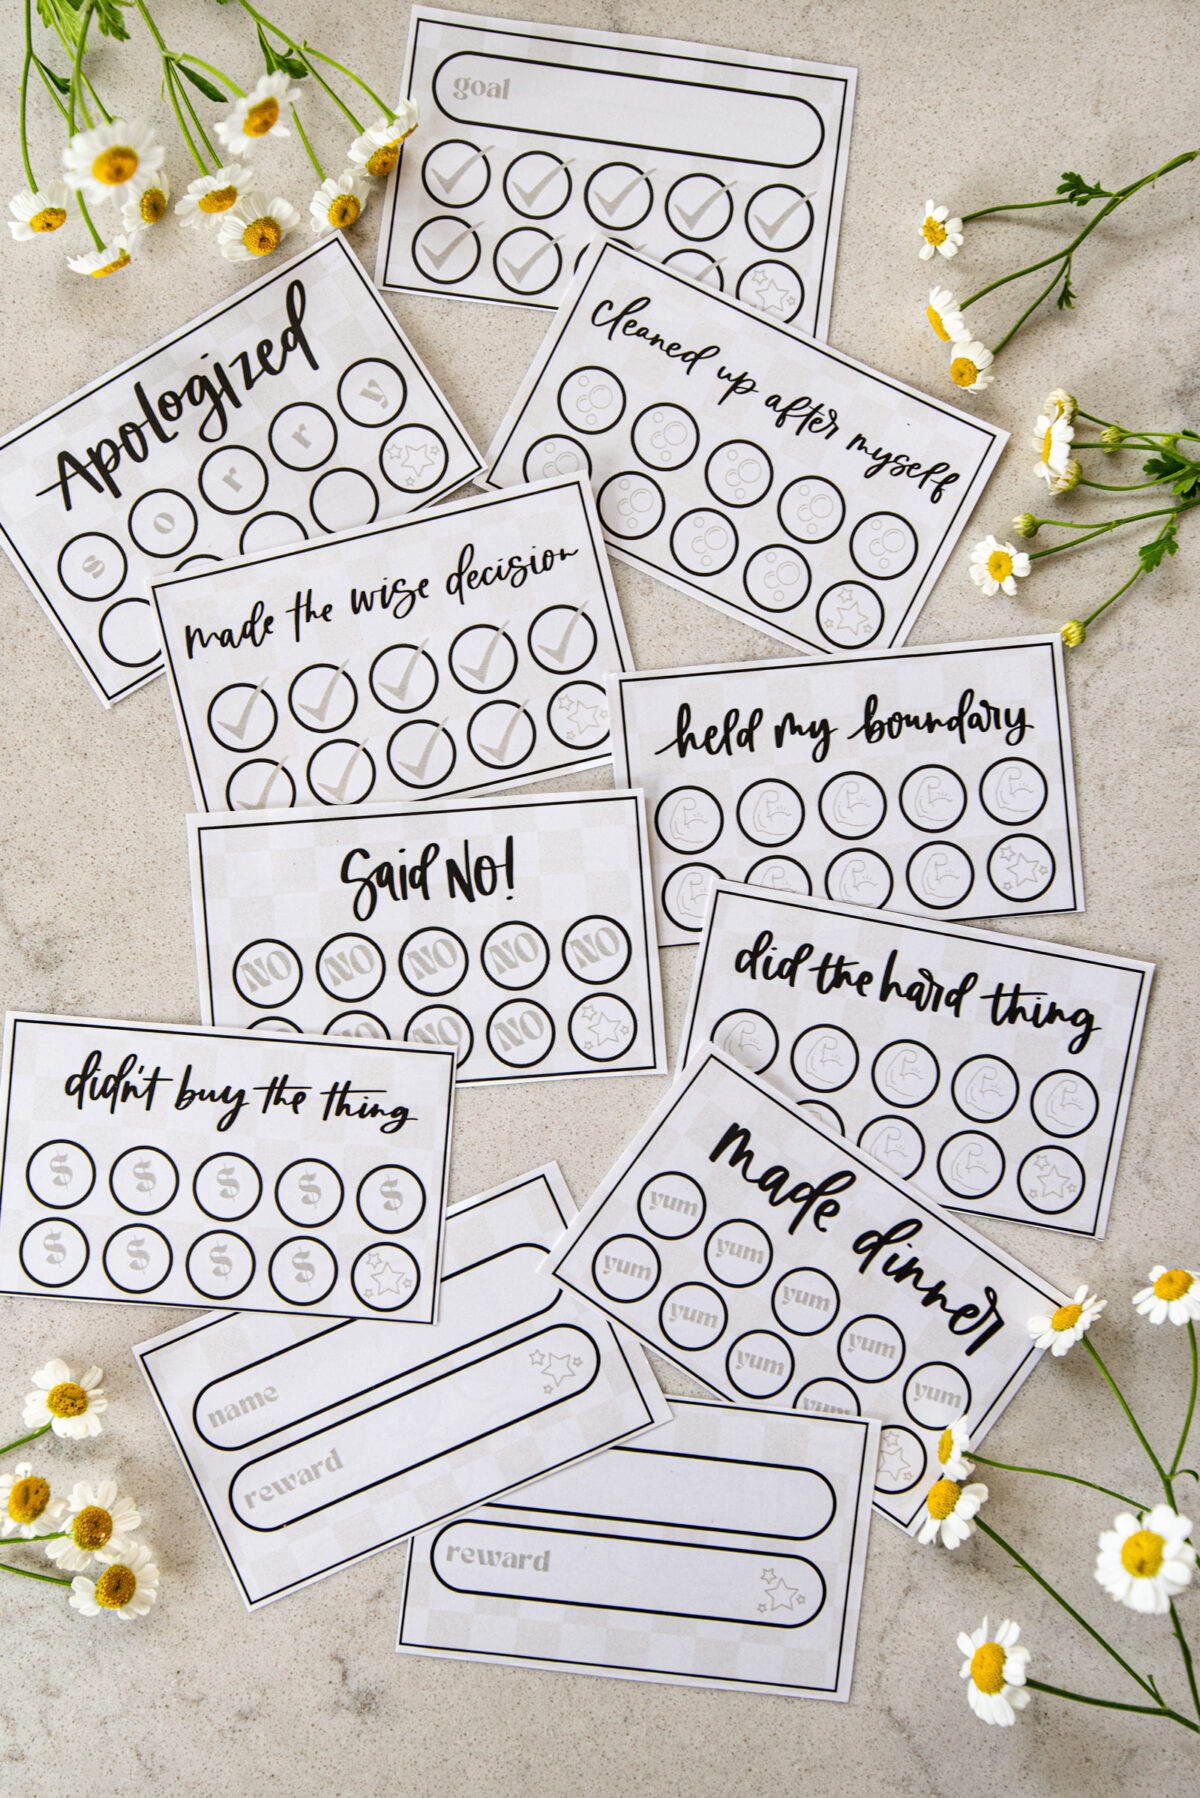 image of printed punch cards for adults, cut to size on countertop with cut flowers punch cards have a soft checkerboard background with hand lettered goals like 'said no!', 'didn't buy the thing', 'made dinner', 'held my boundary' and 'made the wise decision'